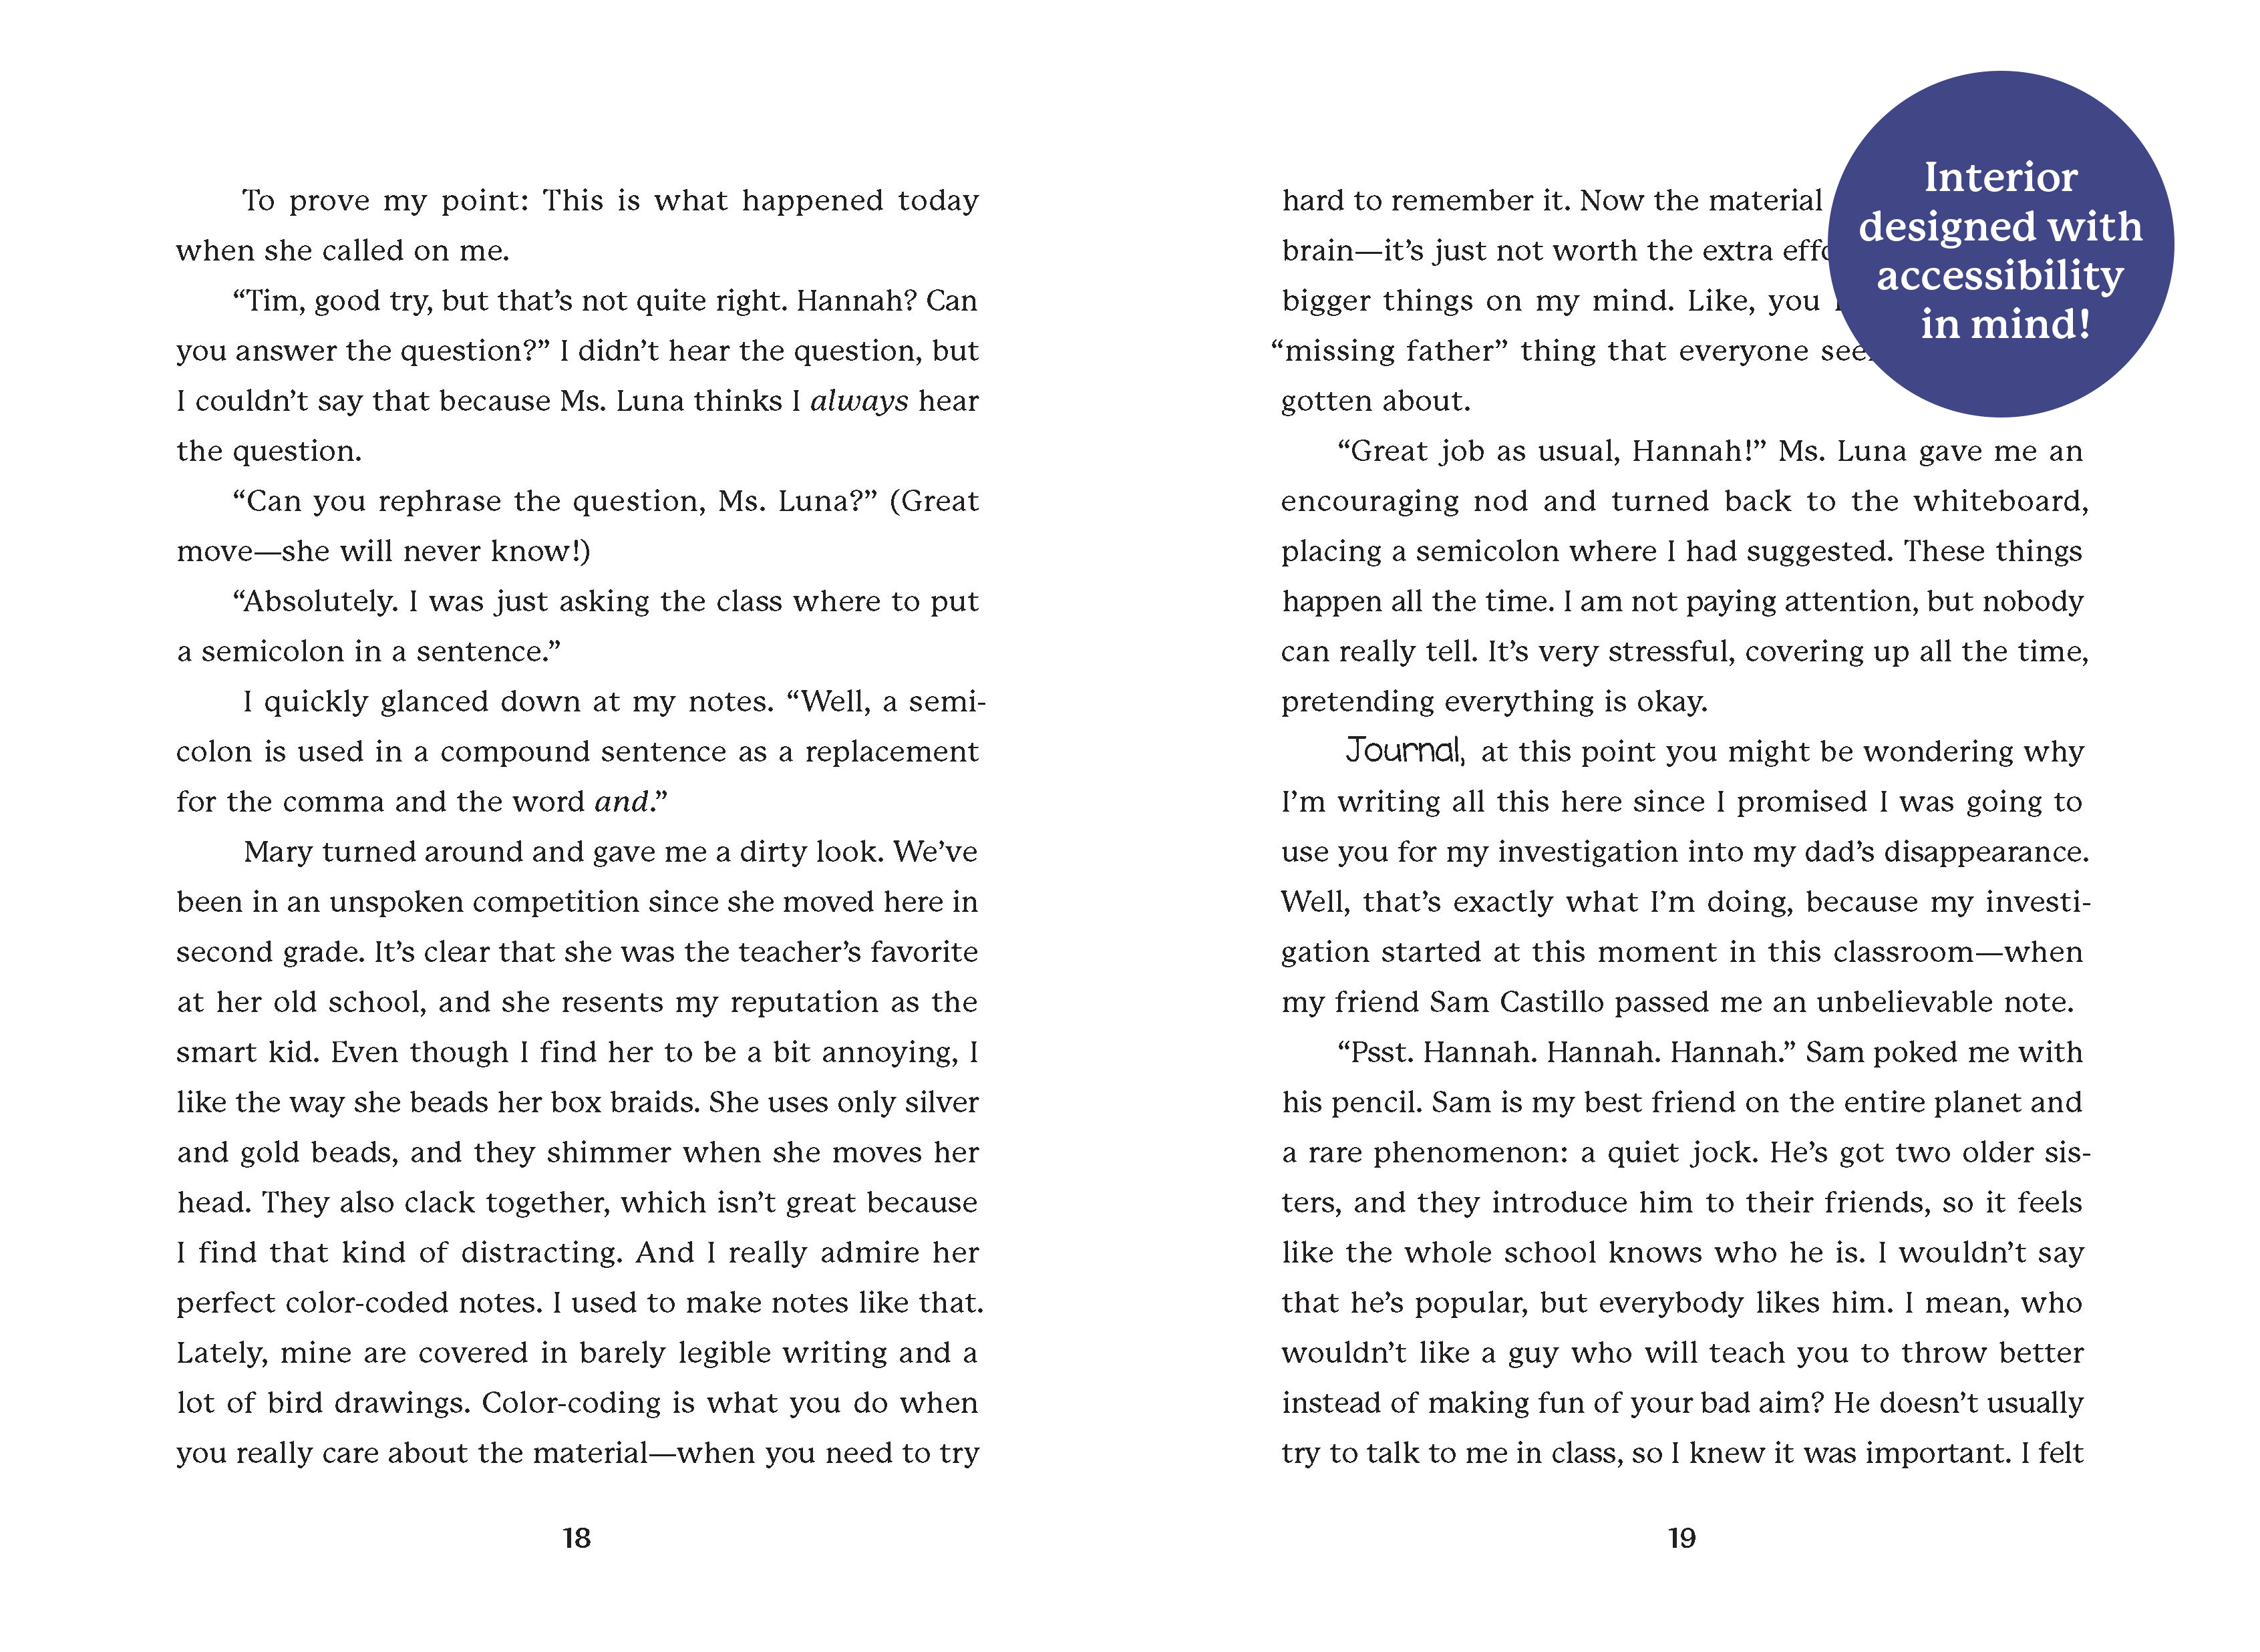 Sample spread of Hannah Edwards Secrets of Riverway from Chapter 3, pages 18 and 19